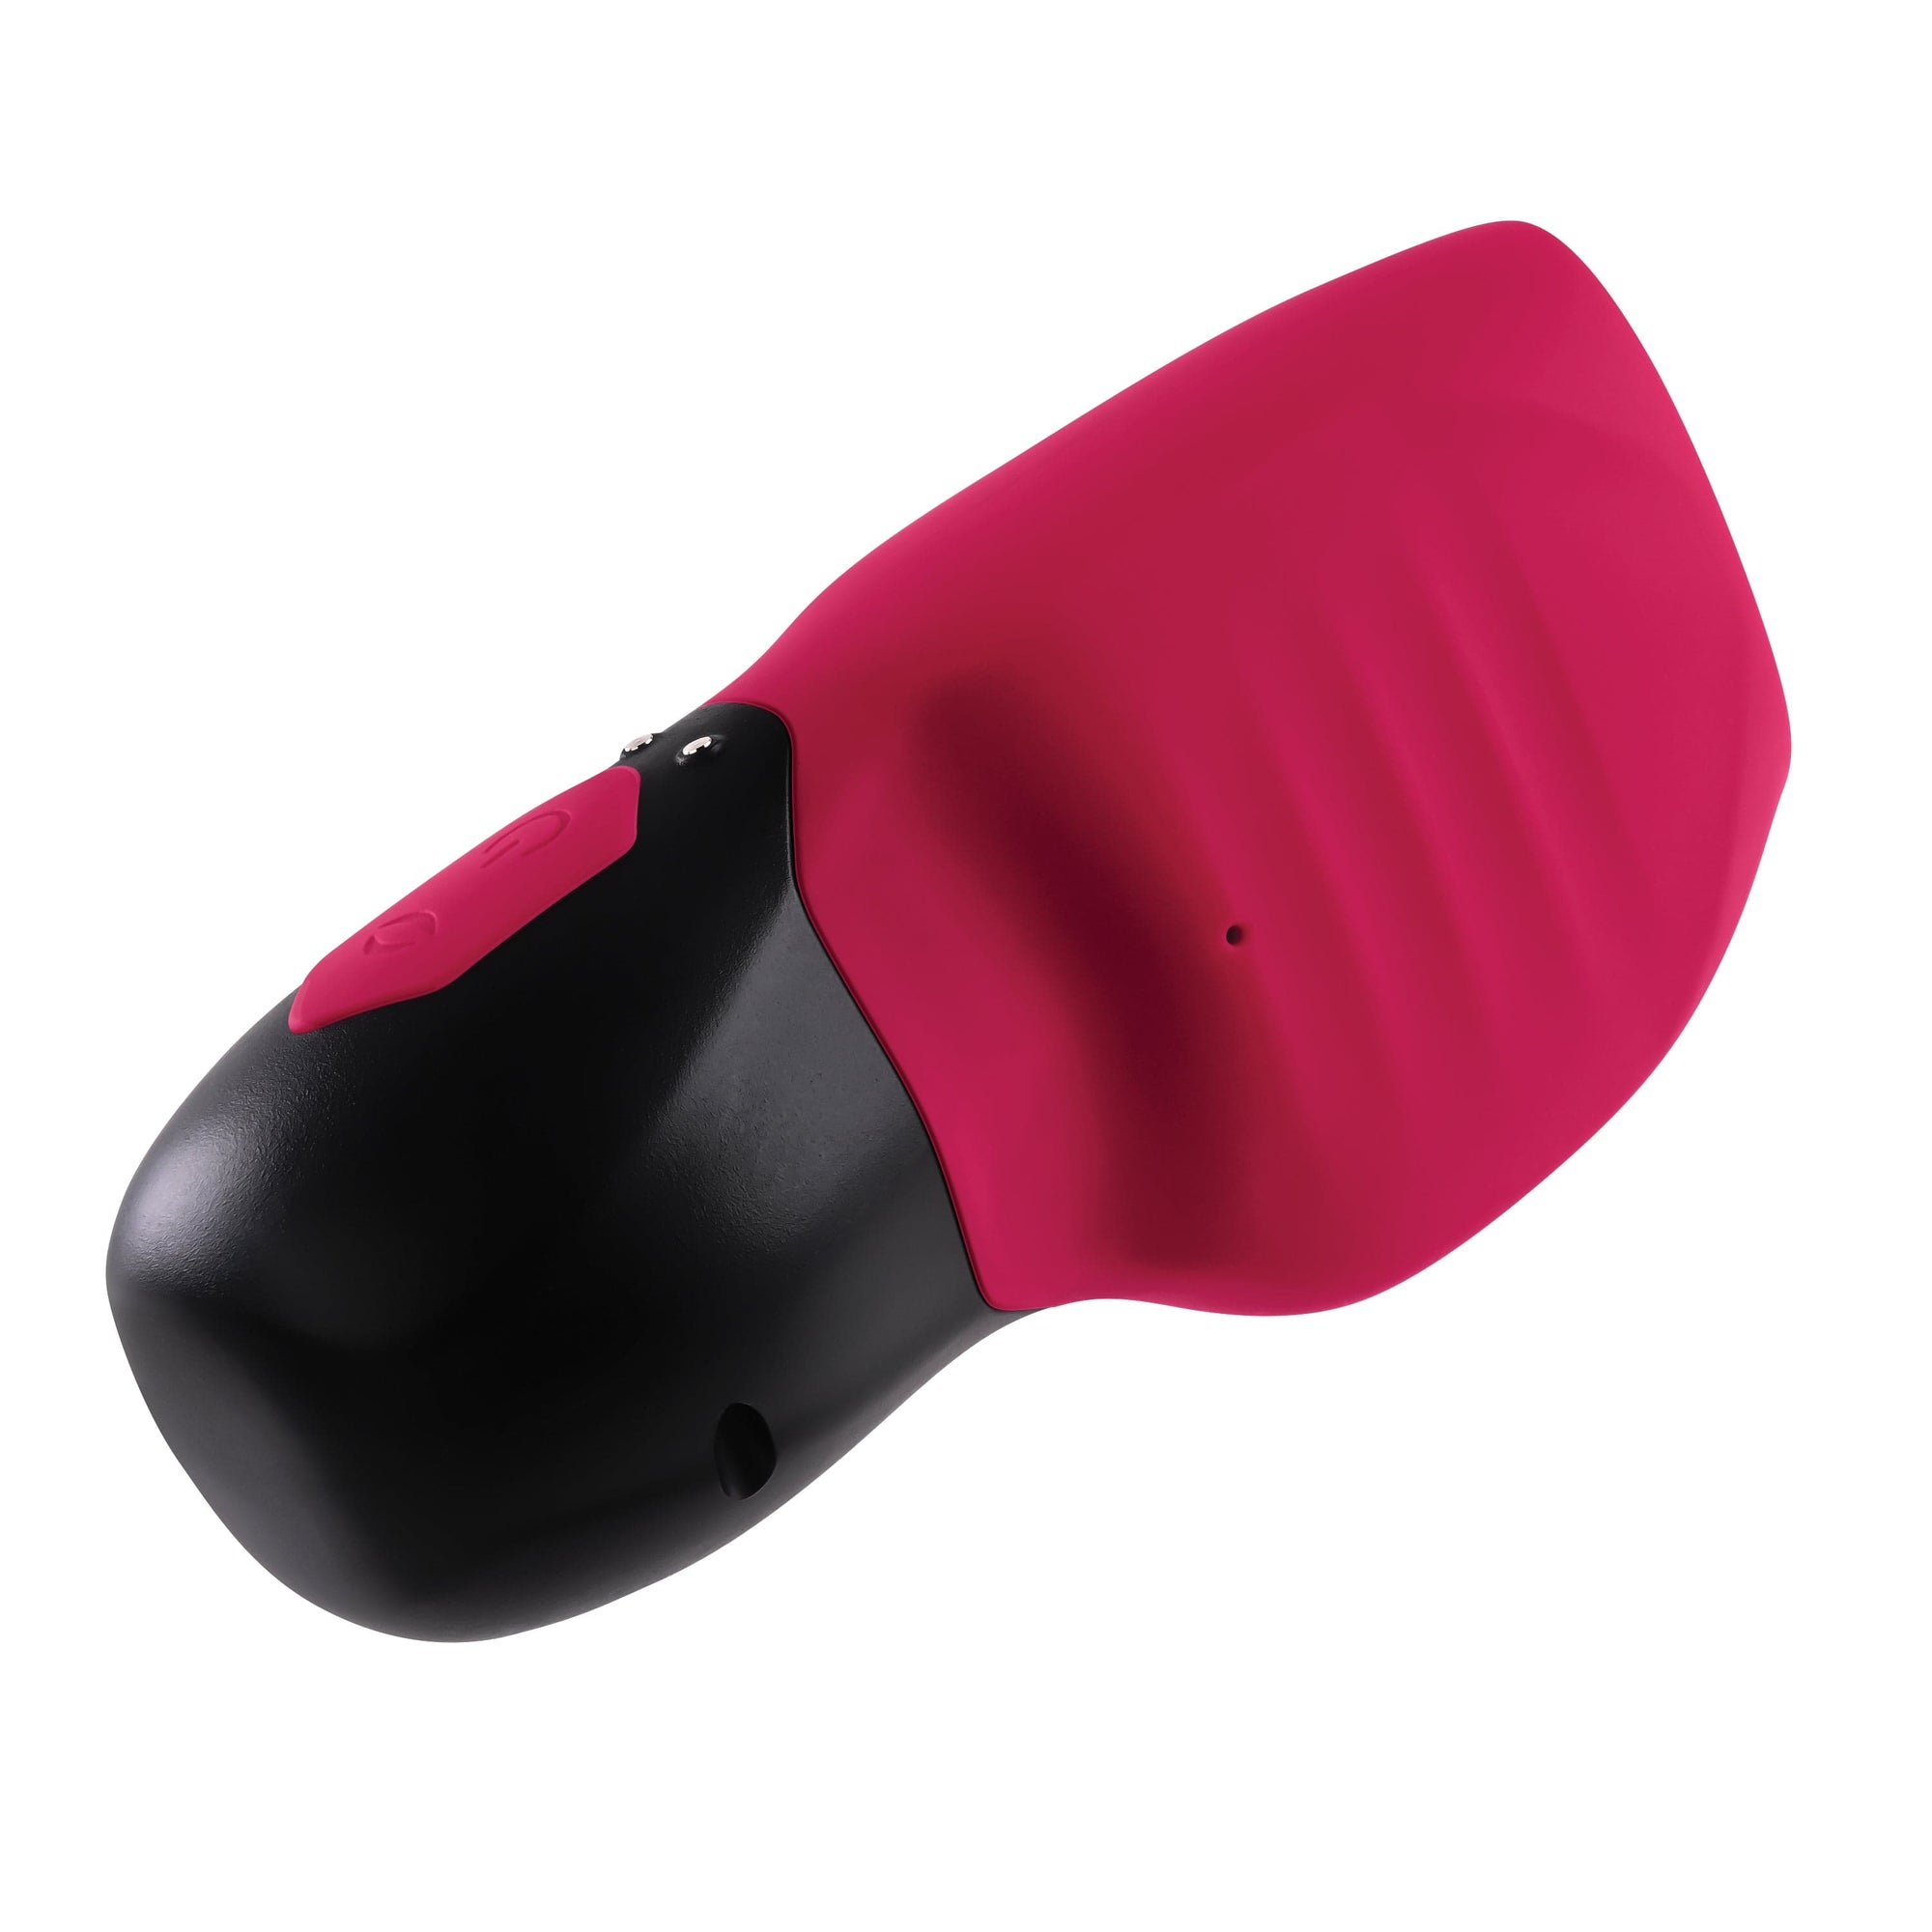 Evolved - Gender X Body Kisses Clit Massager (Red) Clit Massager (Vibration) Rechargeable 844477020211 CherryAffairs